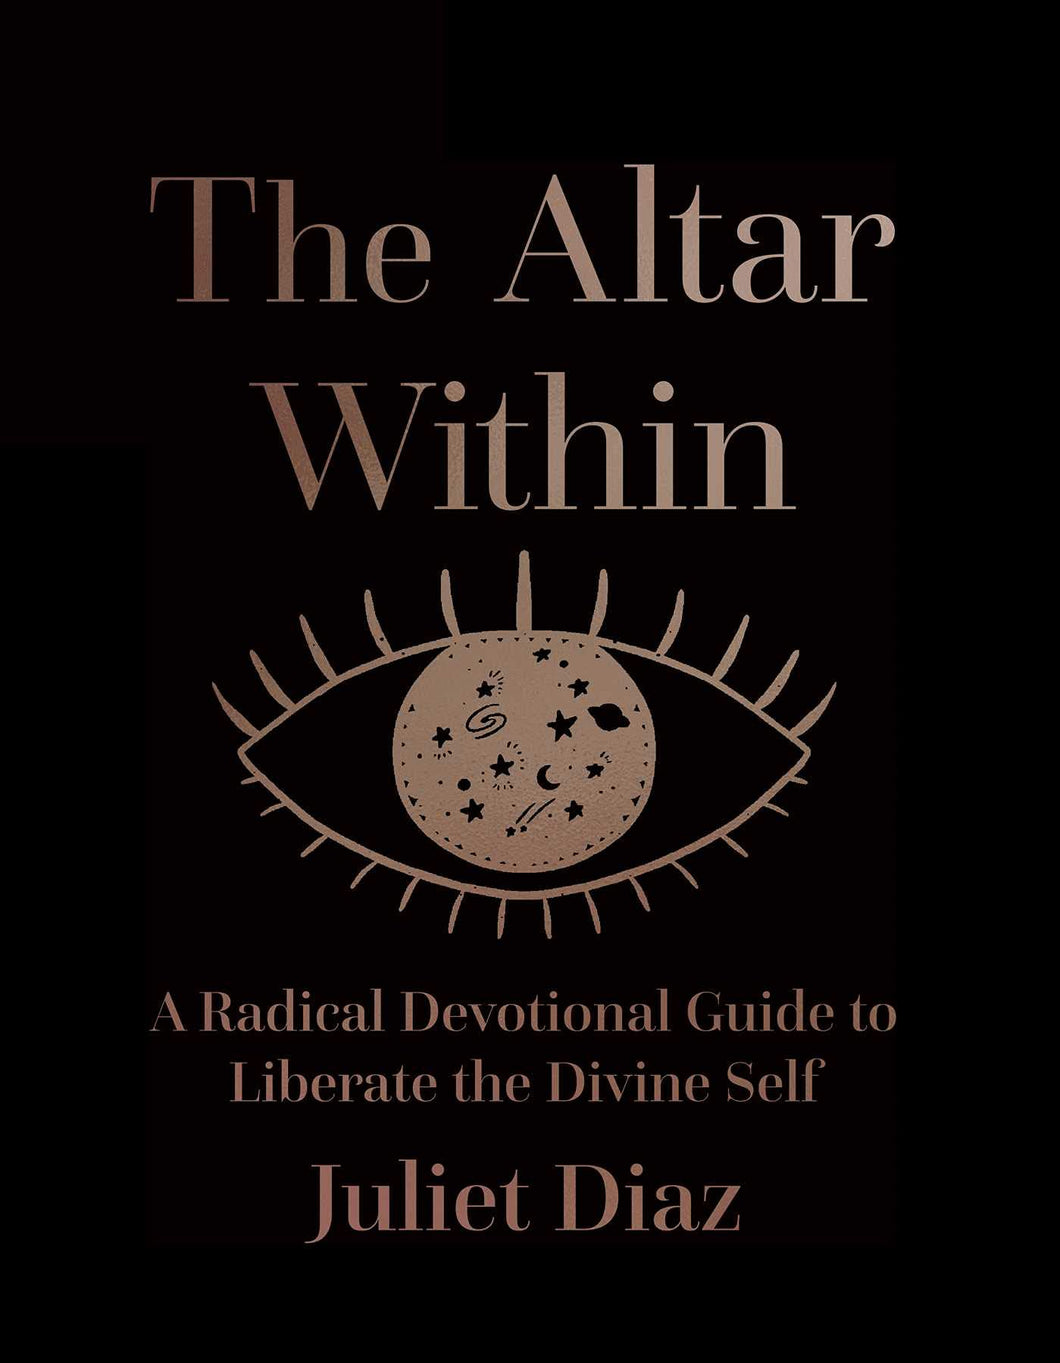 The Altar Within: A Radical Devotional Guide to Liberate the Divine Self by Juliet Diaz